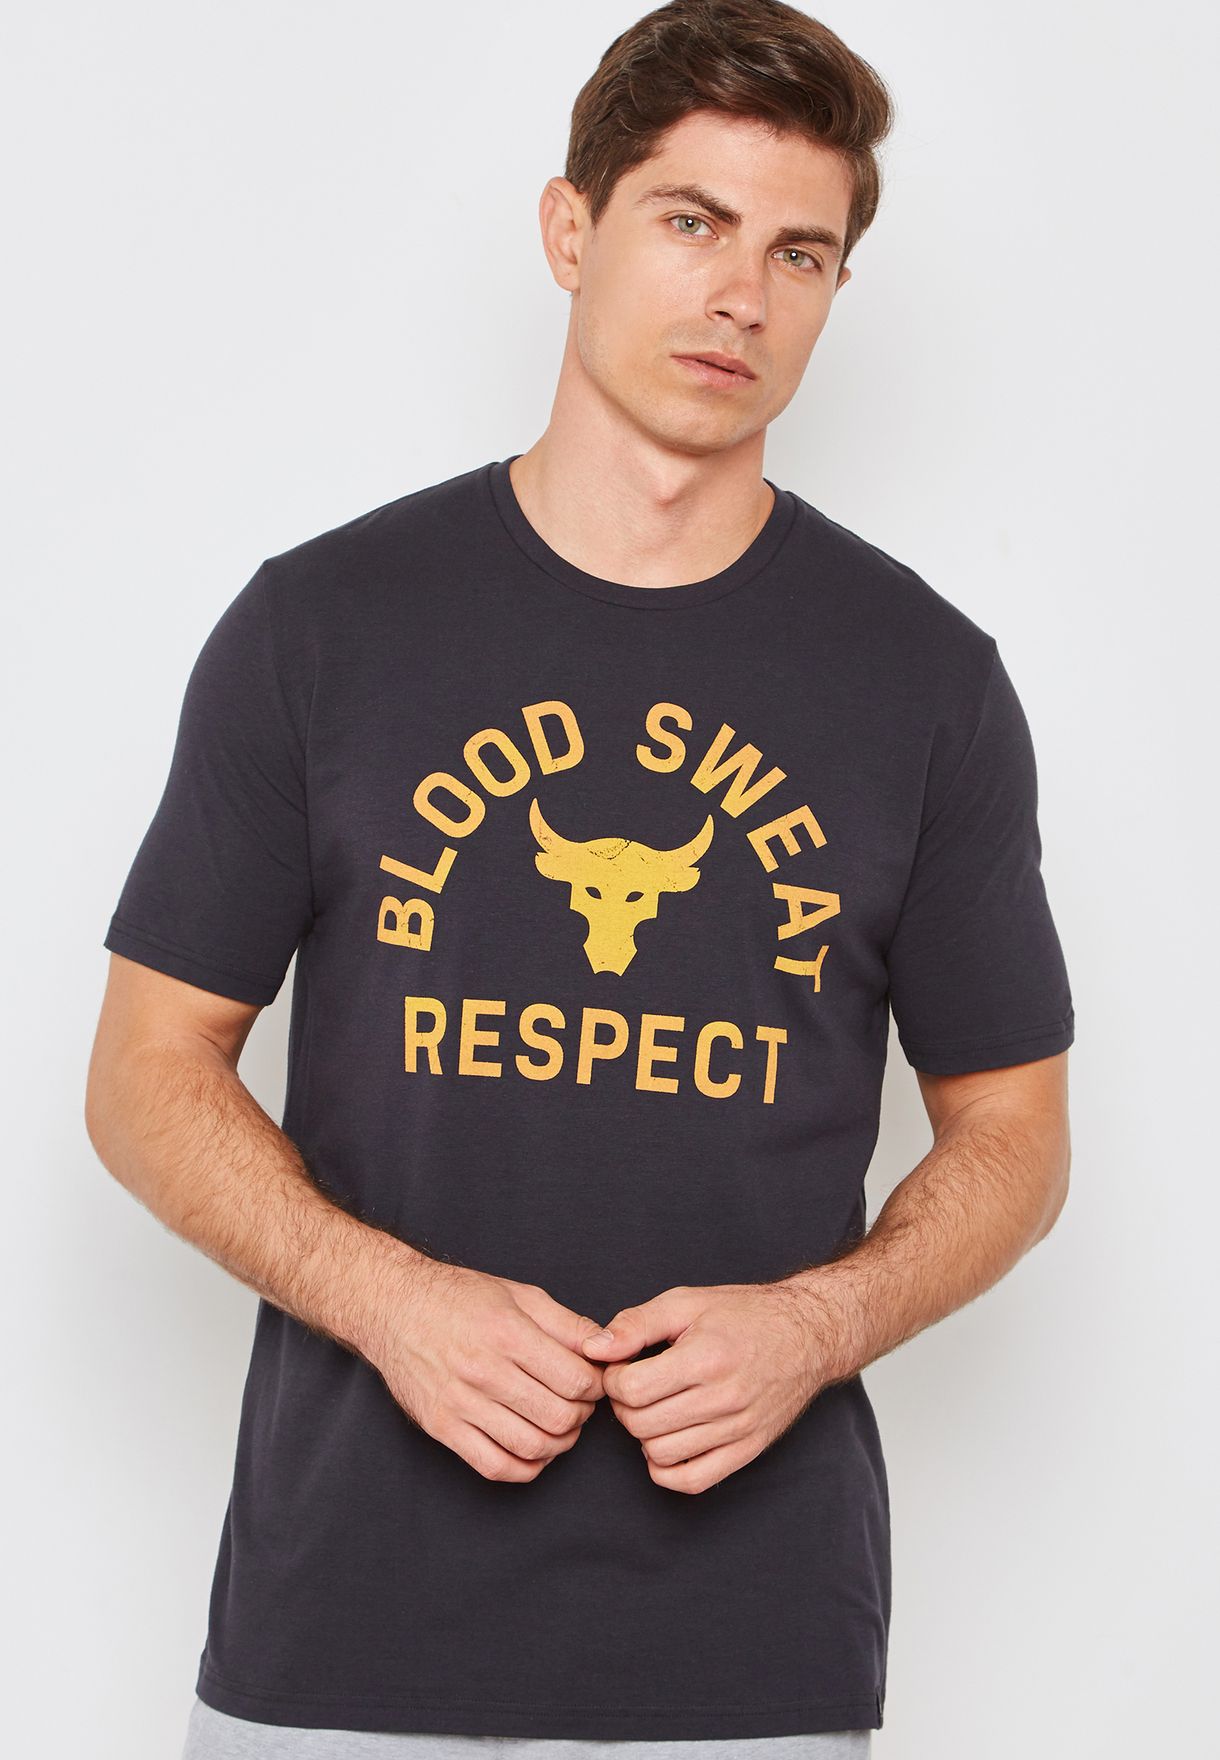 under armour project rock blood sweat respect